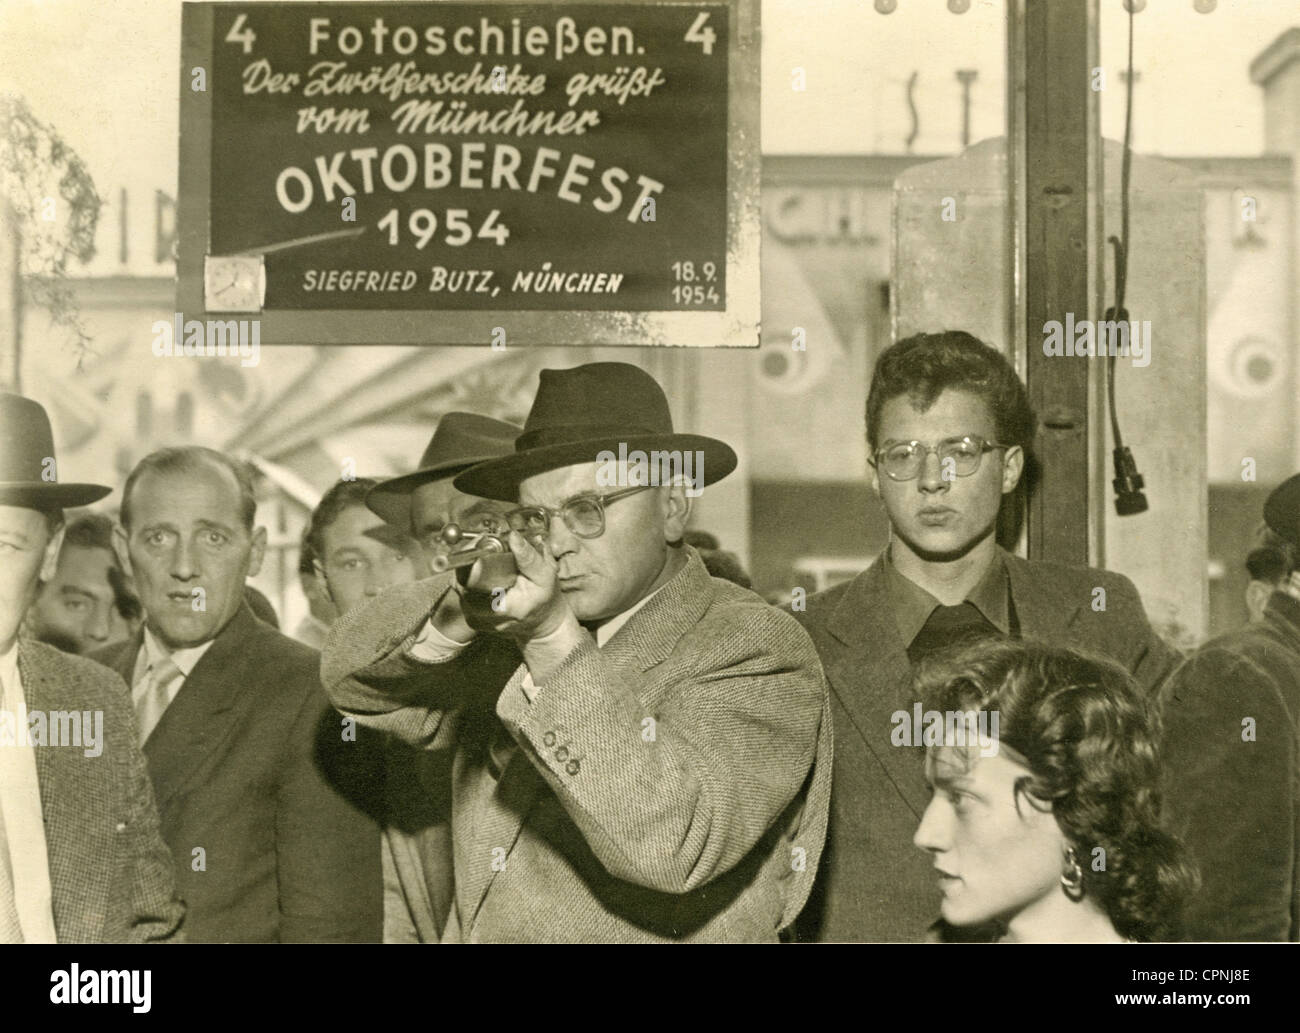 geography / travel, Germany, Munich, Oktoberfest, photograph shooting, the scorer who shot the 12 was automatical taken on a photo, 18.9.1954, Additional-Rights-Clearences-Not Available Stock Photo